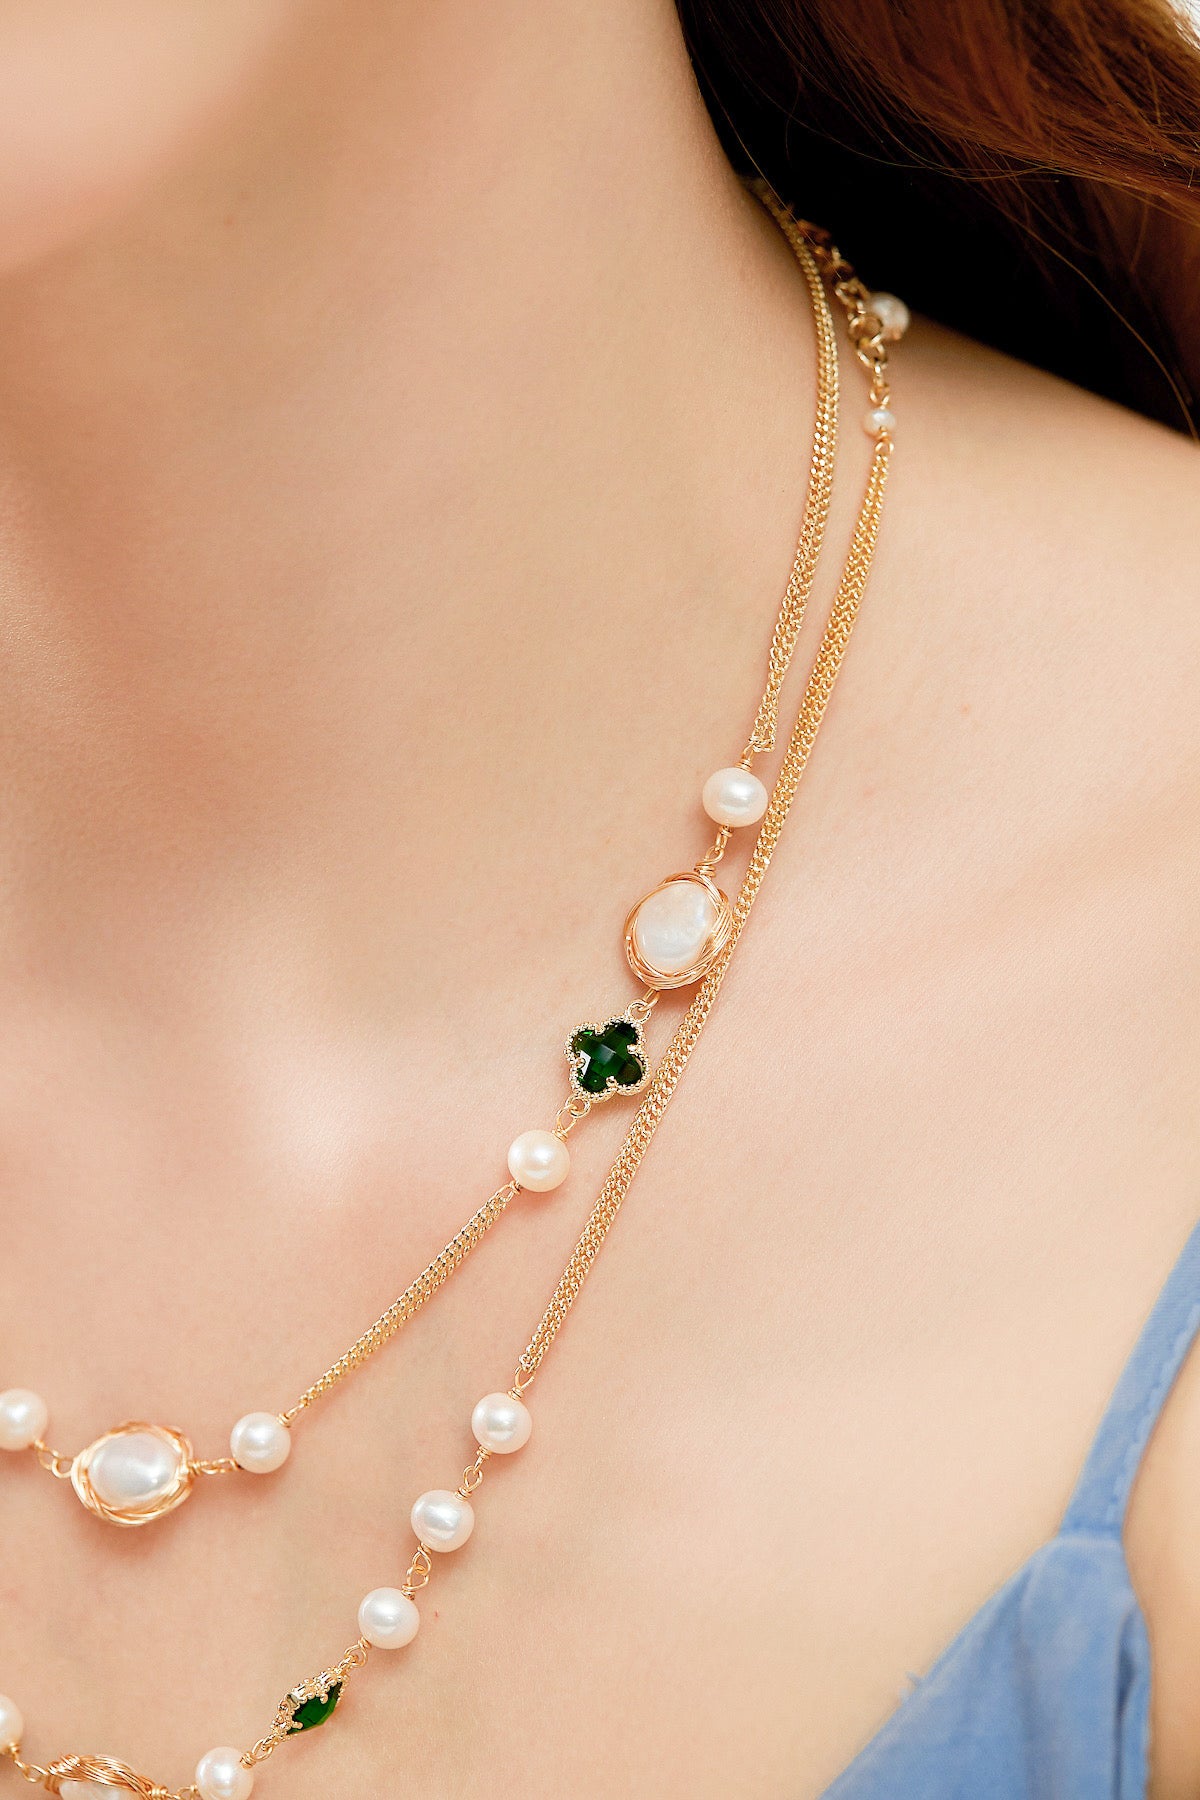 Show us your layered VCA necklaces! | Van cleef necklace, Girly jewelry,  Classy jewelry